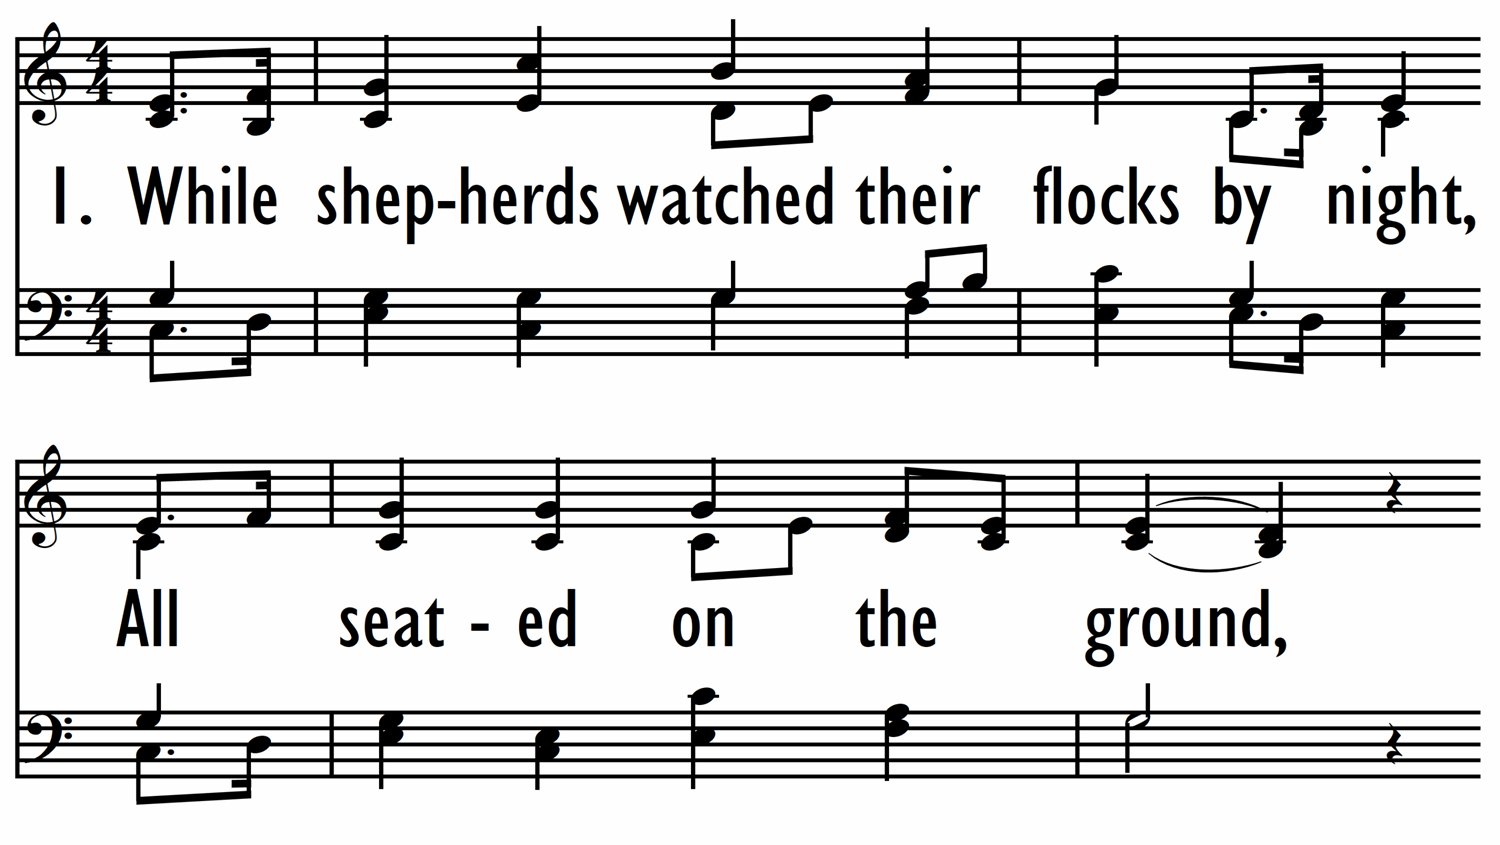 WHILE SHEPHERDS WATCHED THEIR FLOCKS-ppt